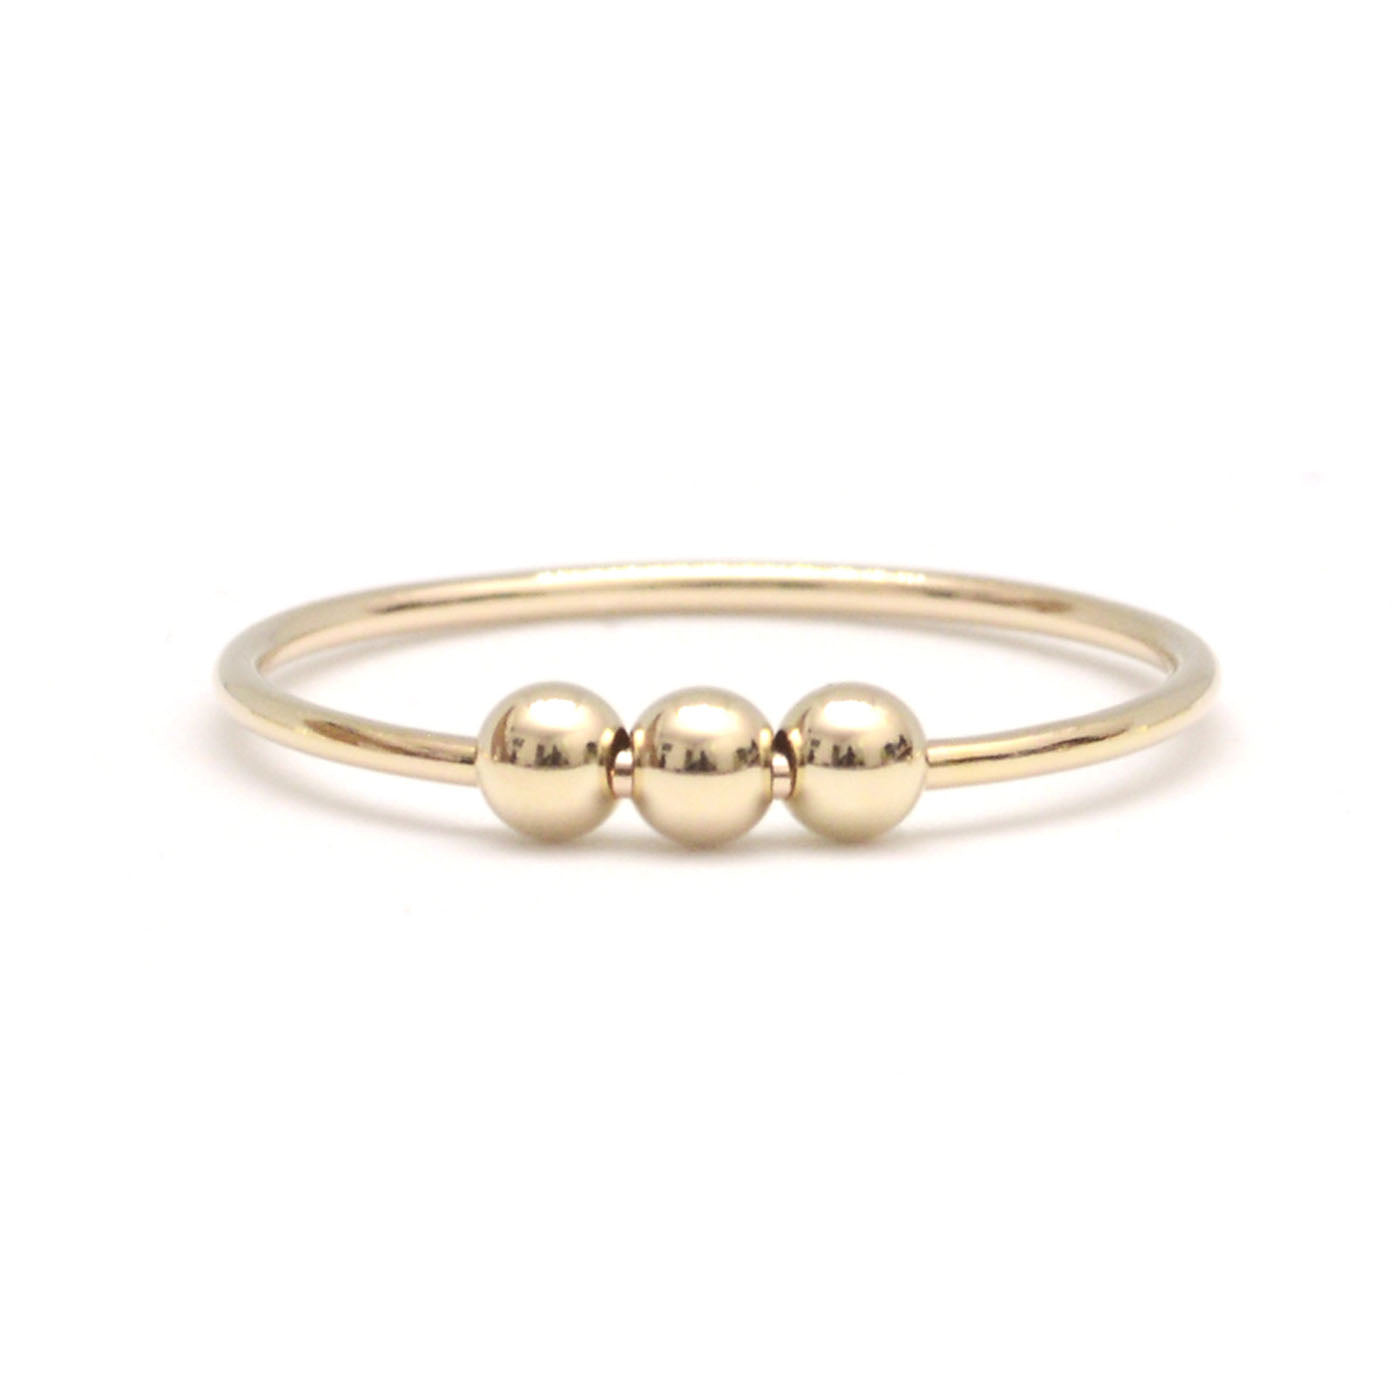 Abacus Bead Stacking Anxiety Ring - Favor Jewelry